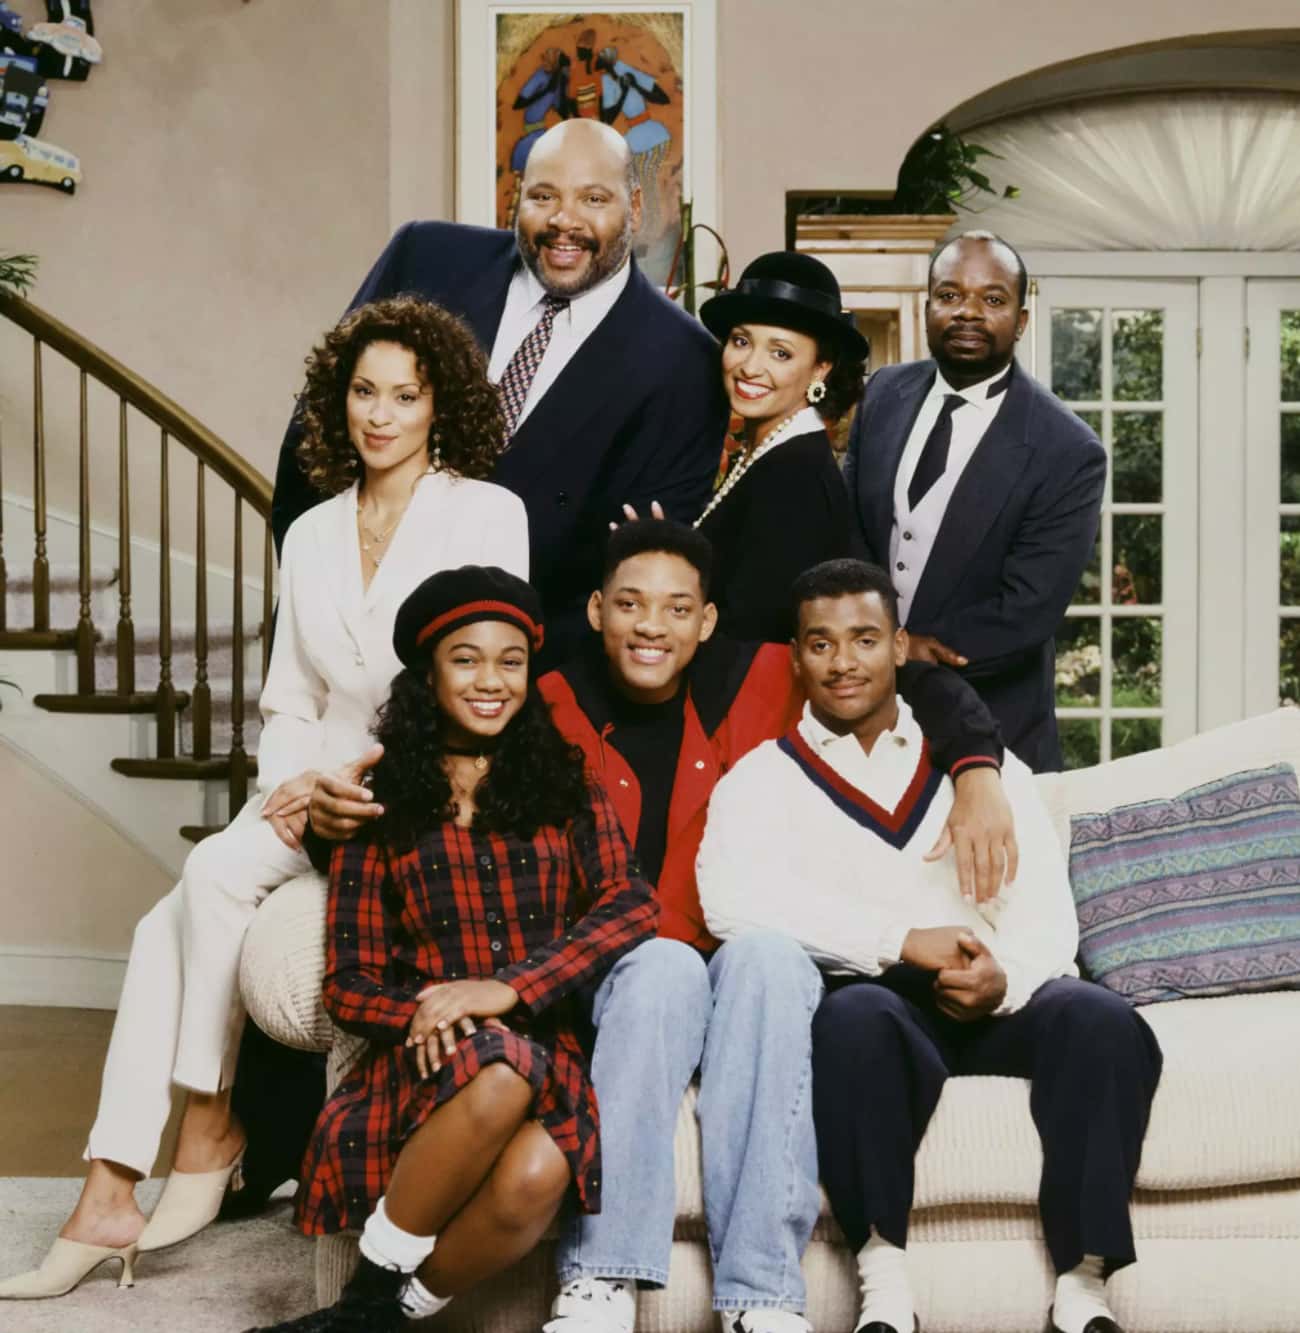 The Banks Family Mirrors The Seven Deadly Sins In 'The Fresh Prince Of Bel-Air'